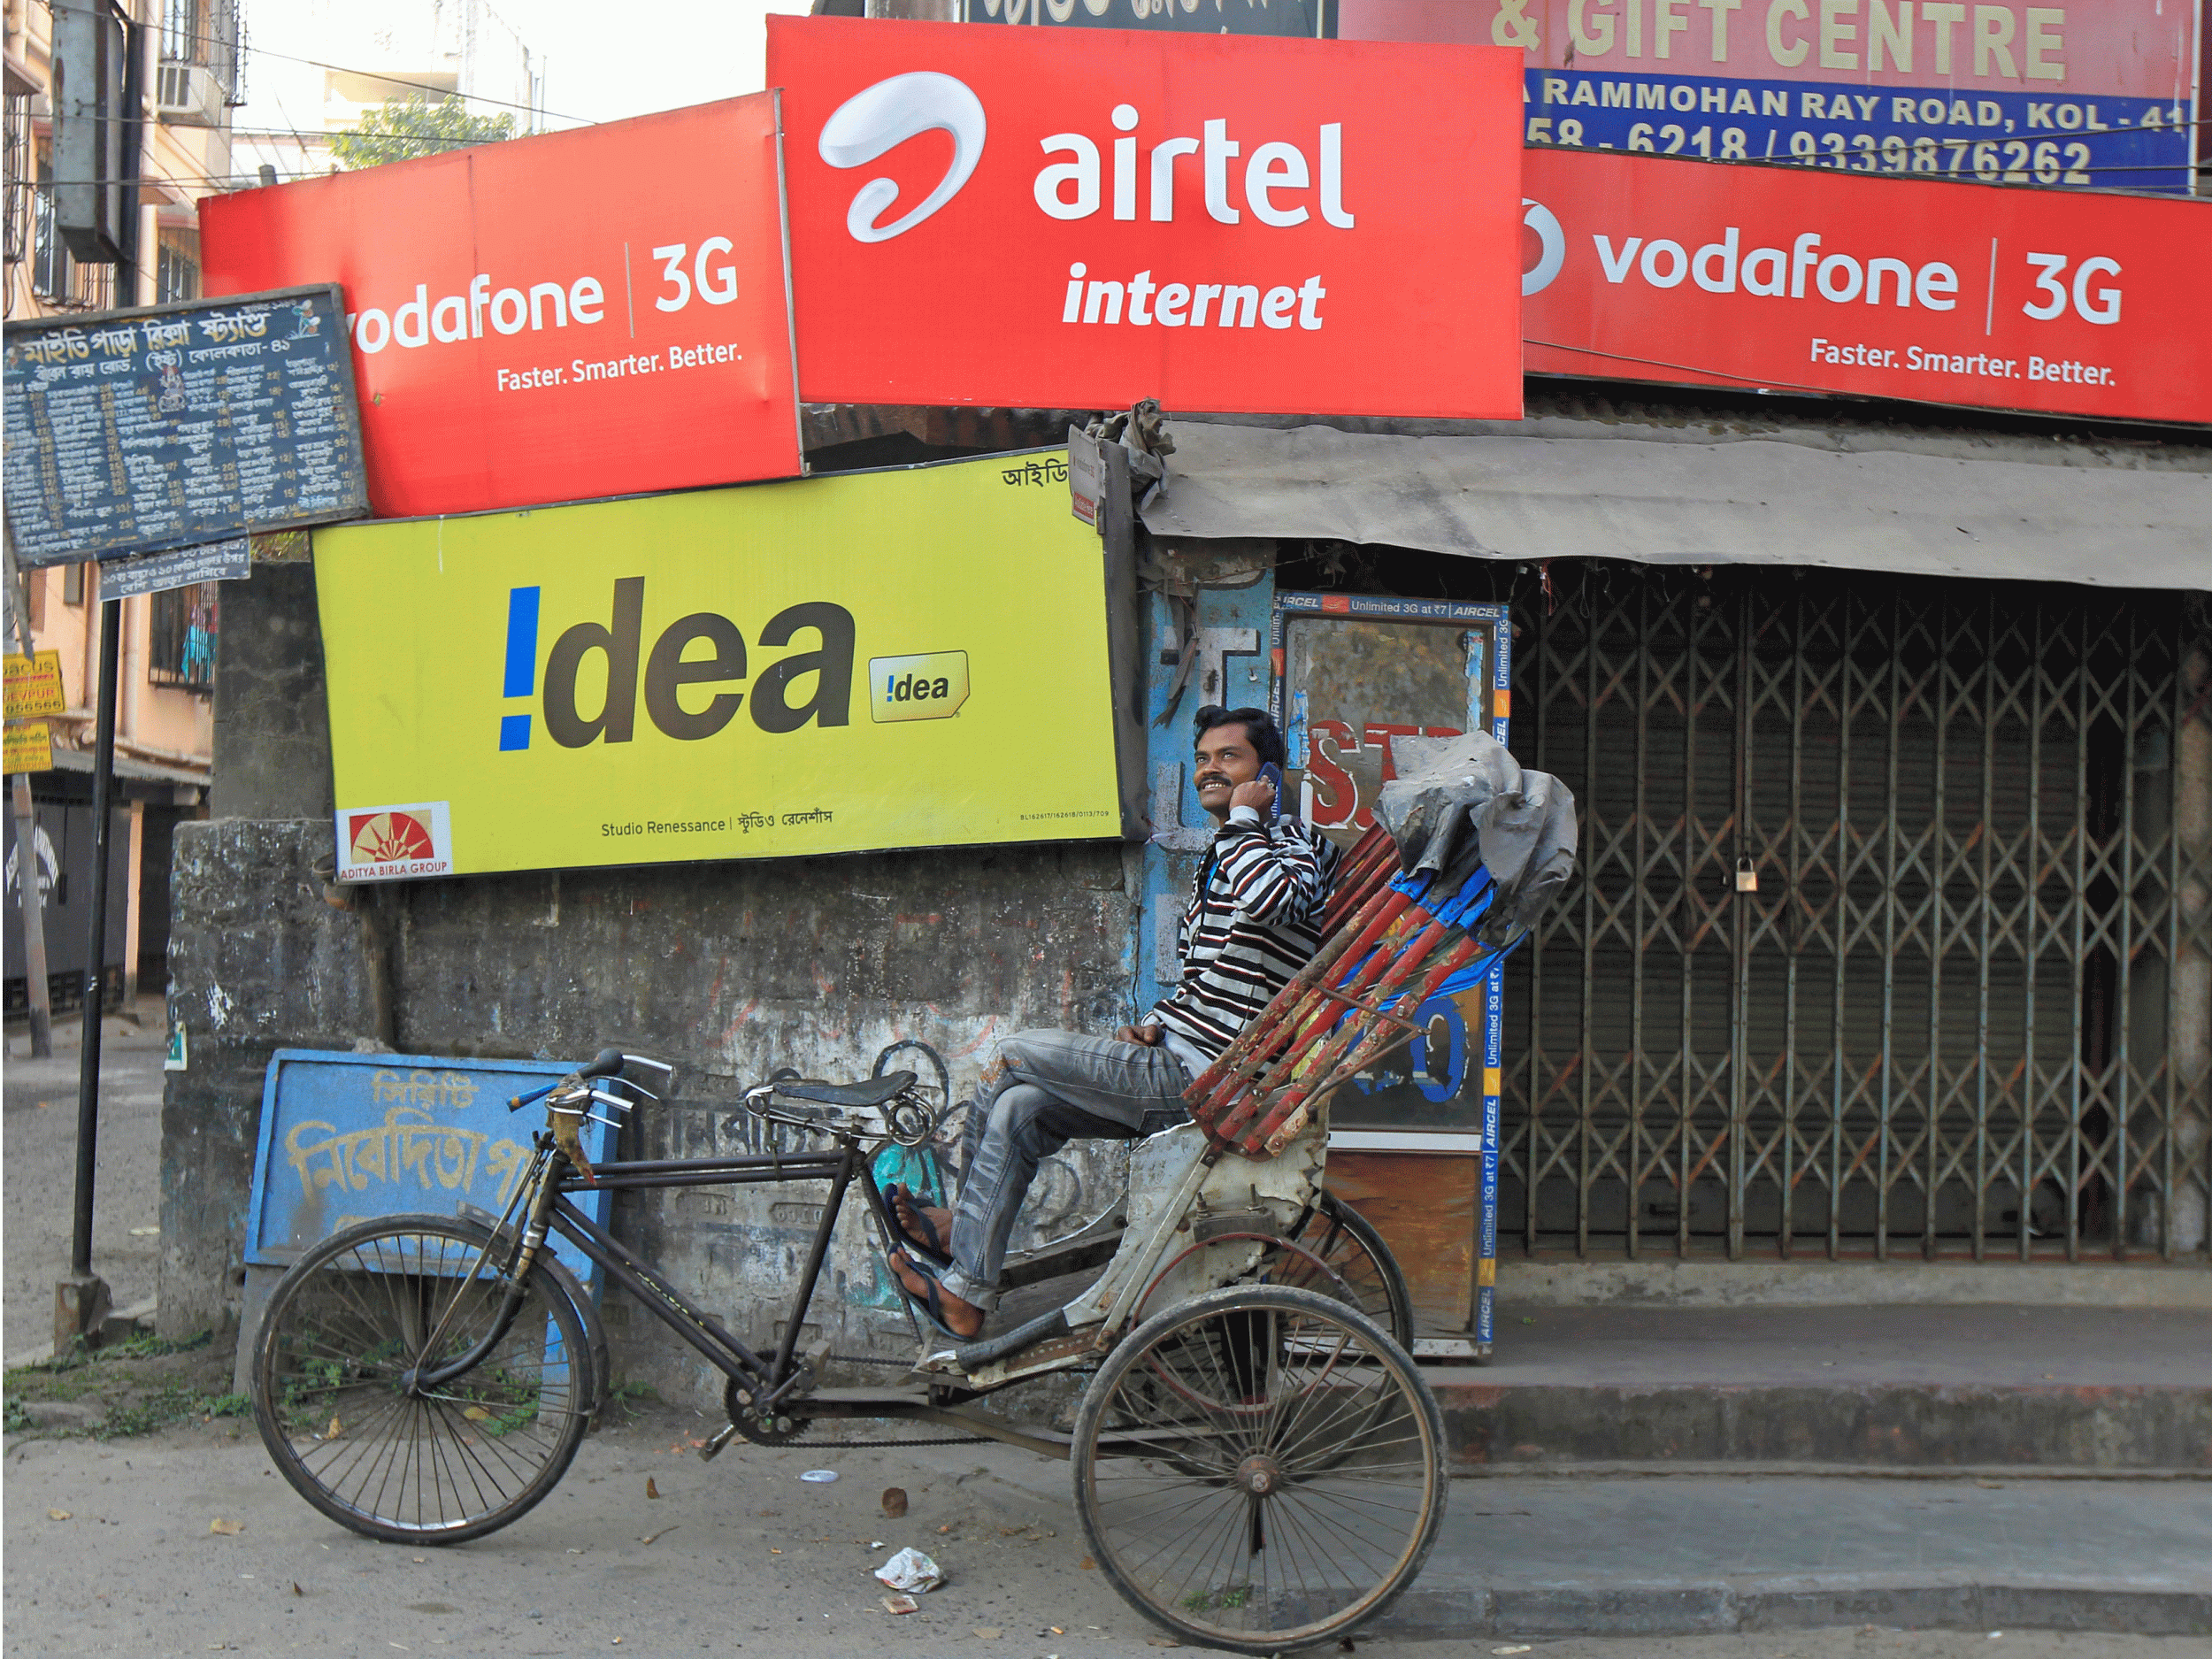 Vodafone and Idea Cellular to create India's biggest telecoms group 